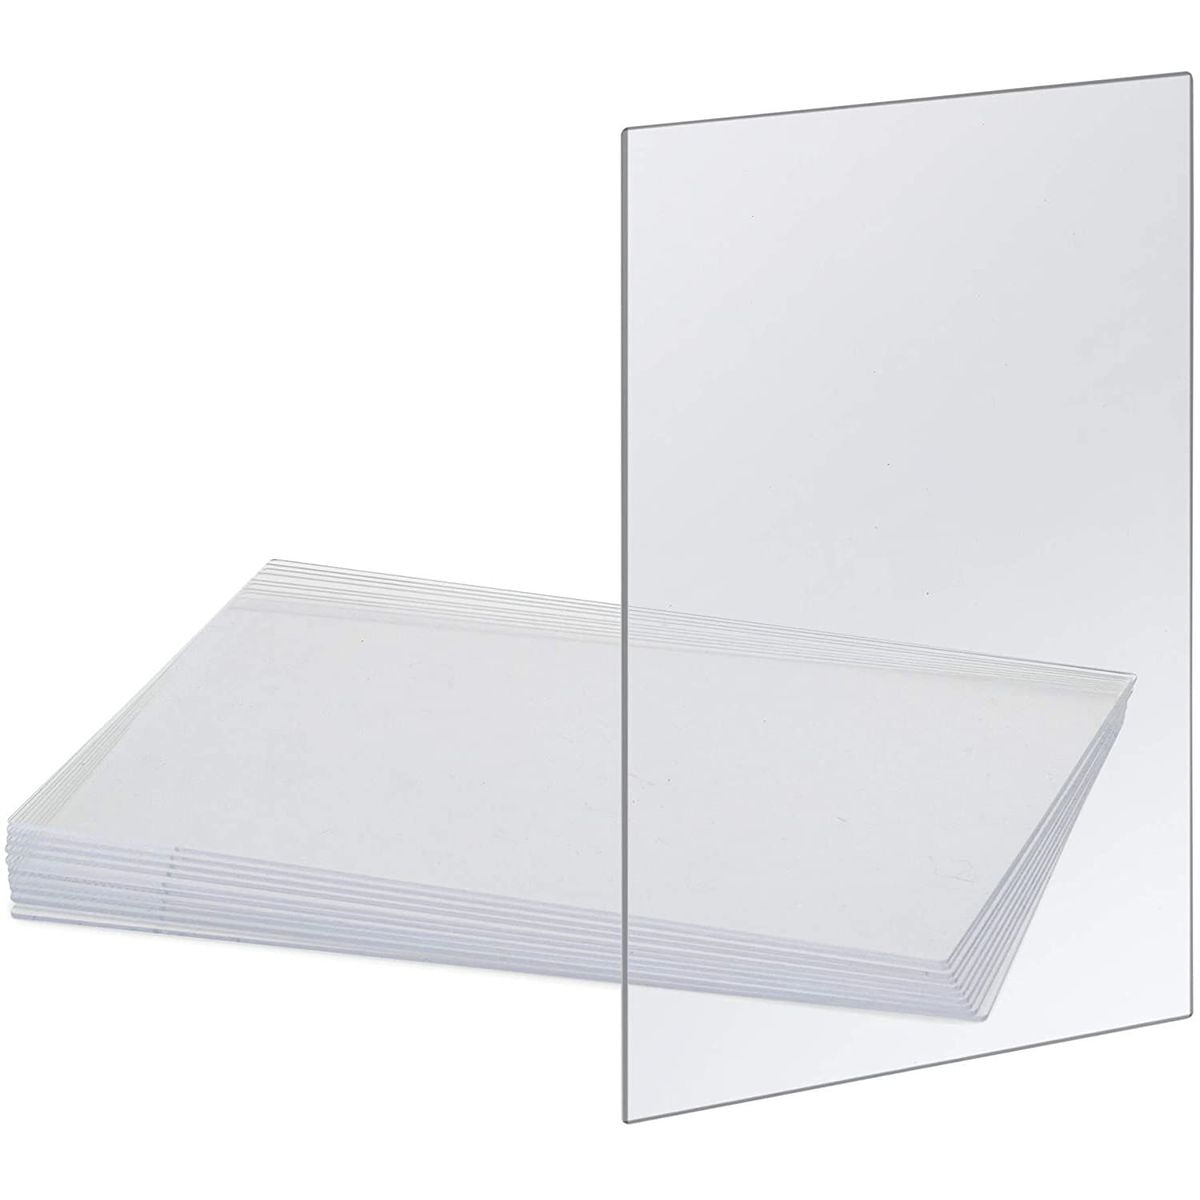 4x6 Inches Acrylic Plastic Panel Gartful 10 Packs 0.08 Inch Craft 2mm DIY Display Projects Thick Clear Plexiglass Acrylic Sheet Photo Frame Replacement Board for Signs